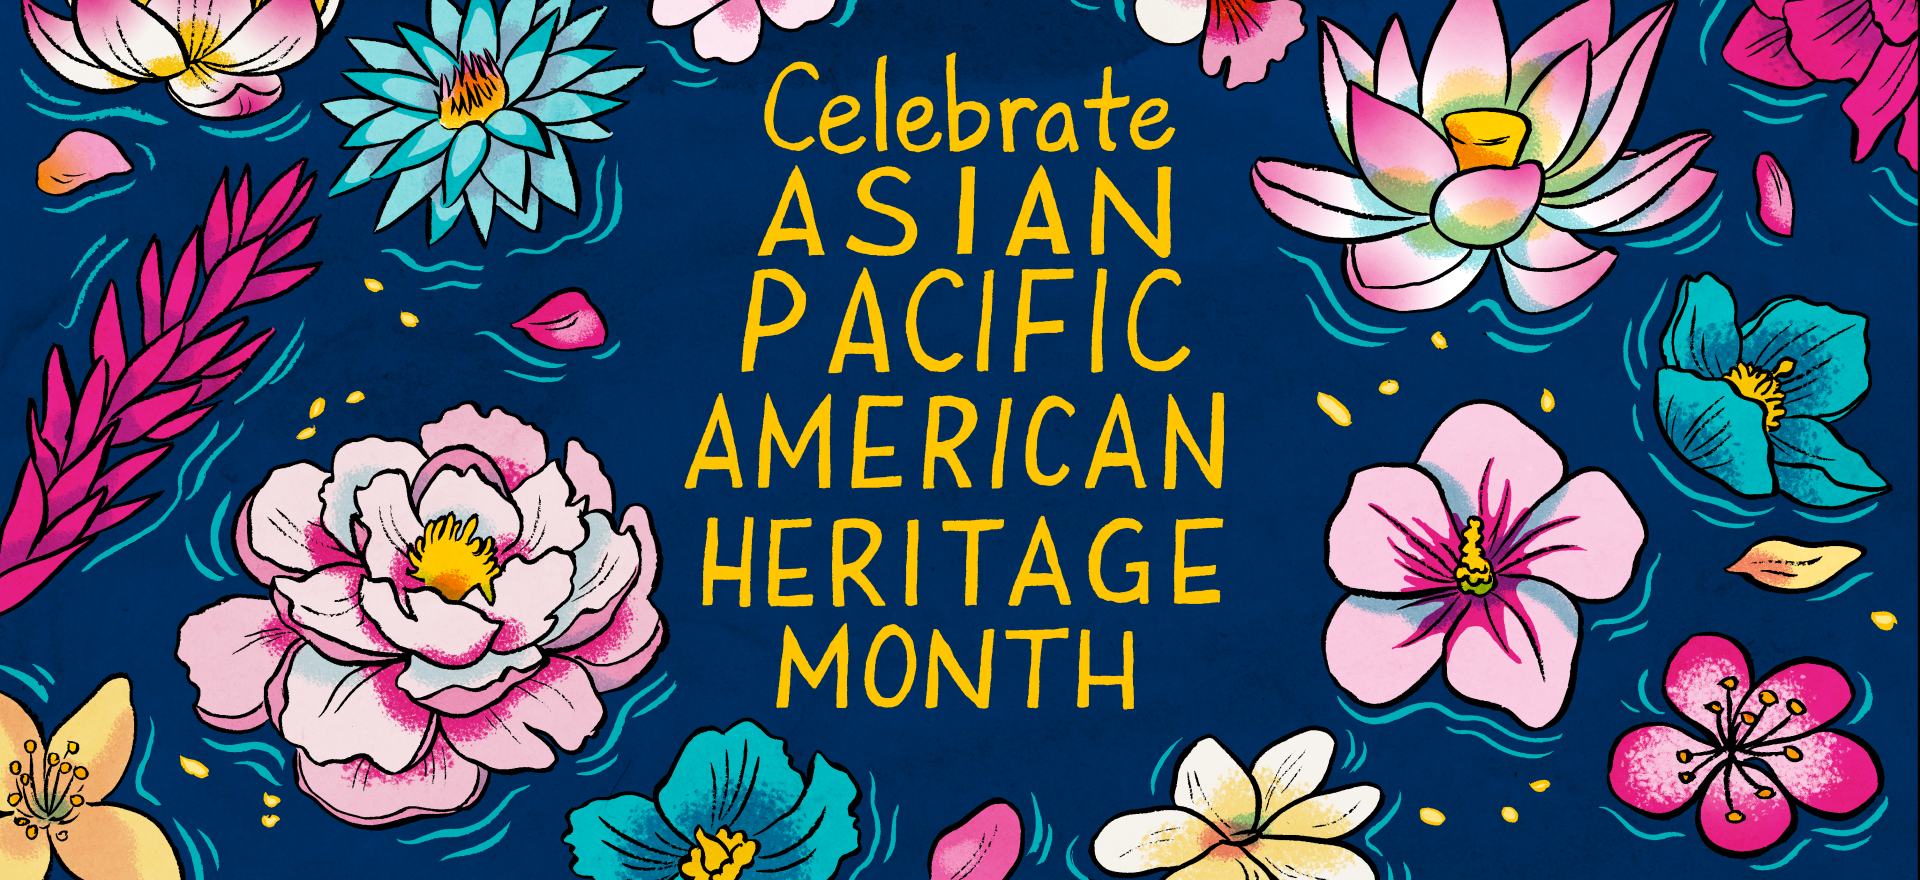 Celebrate Asian Pacific American Heritage Month 